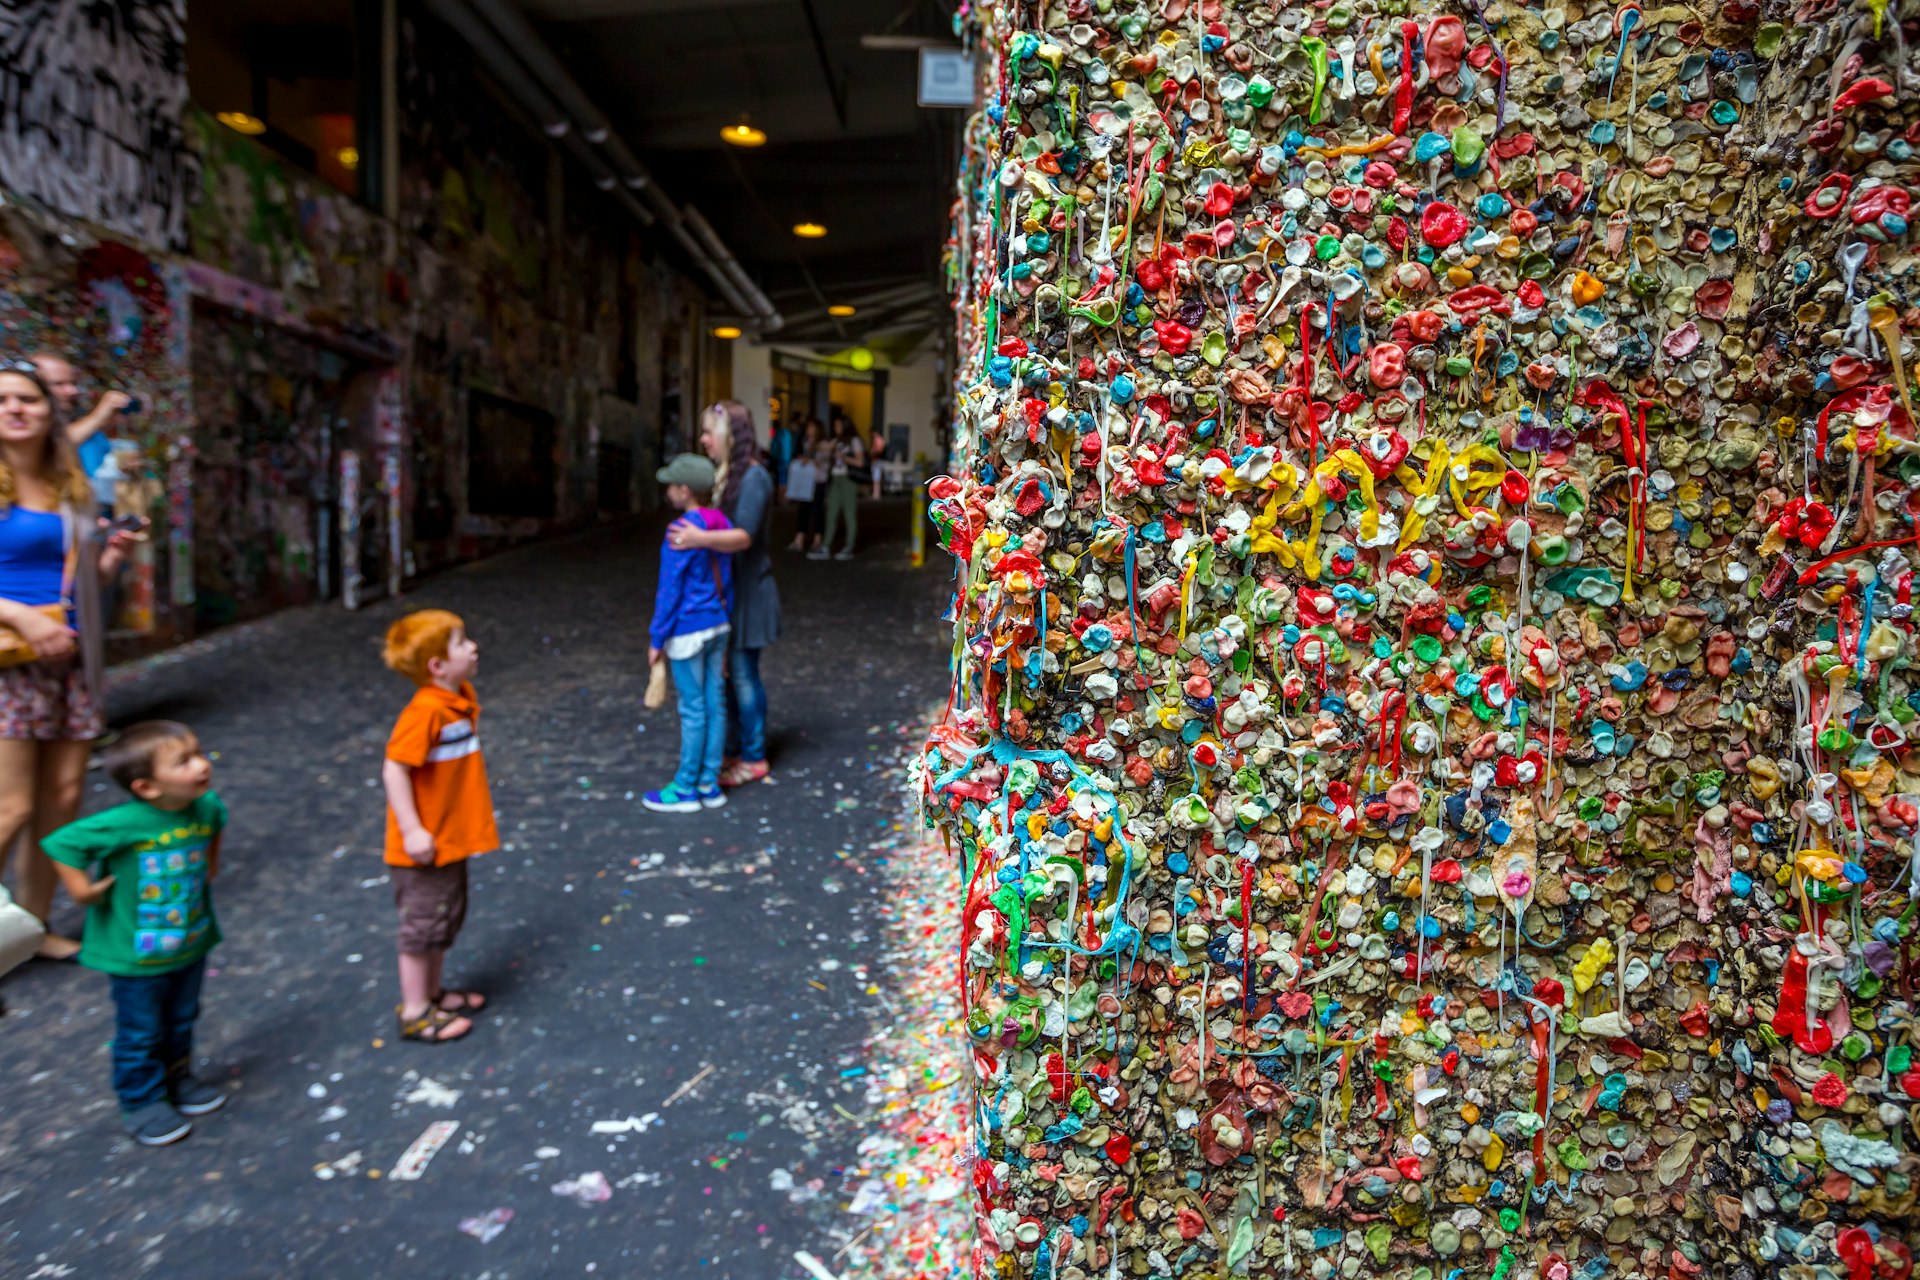 Kids playing near Seattle's famous Gum Wall